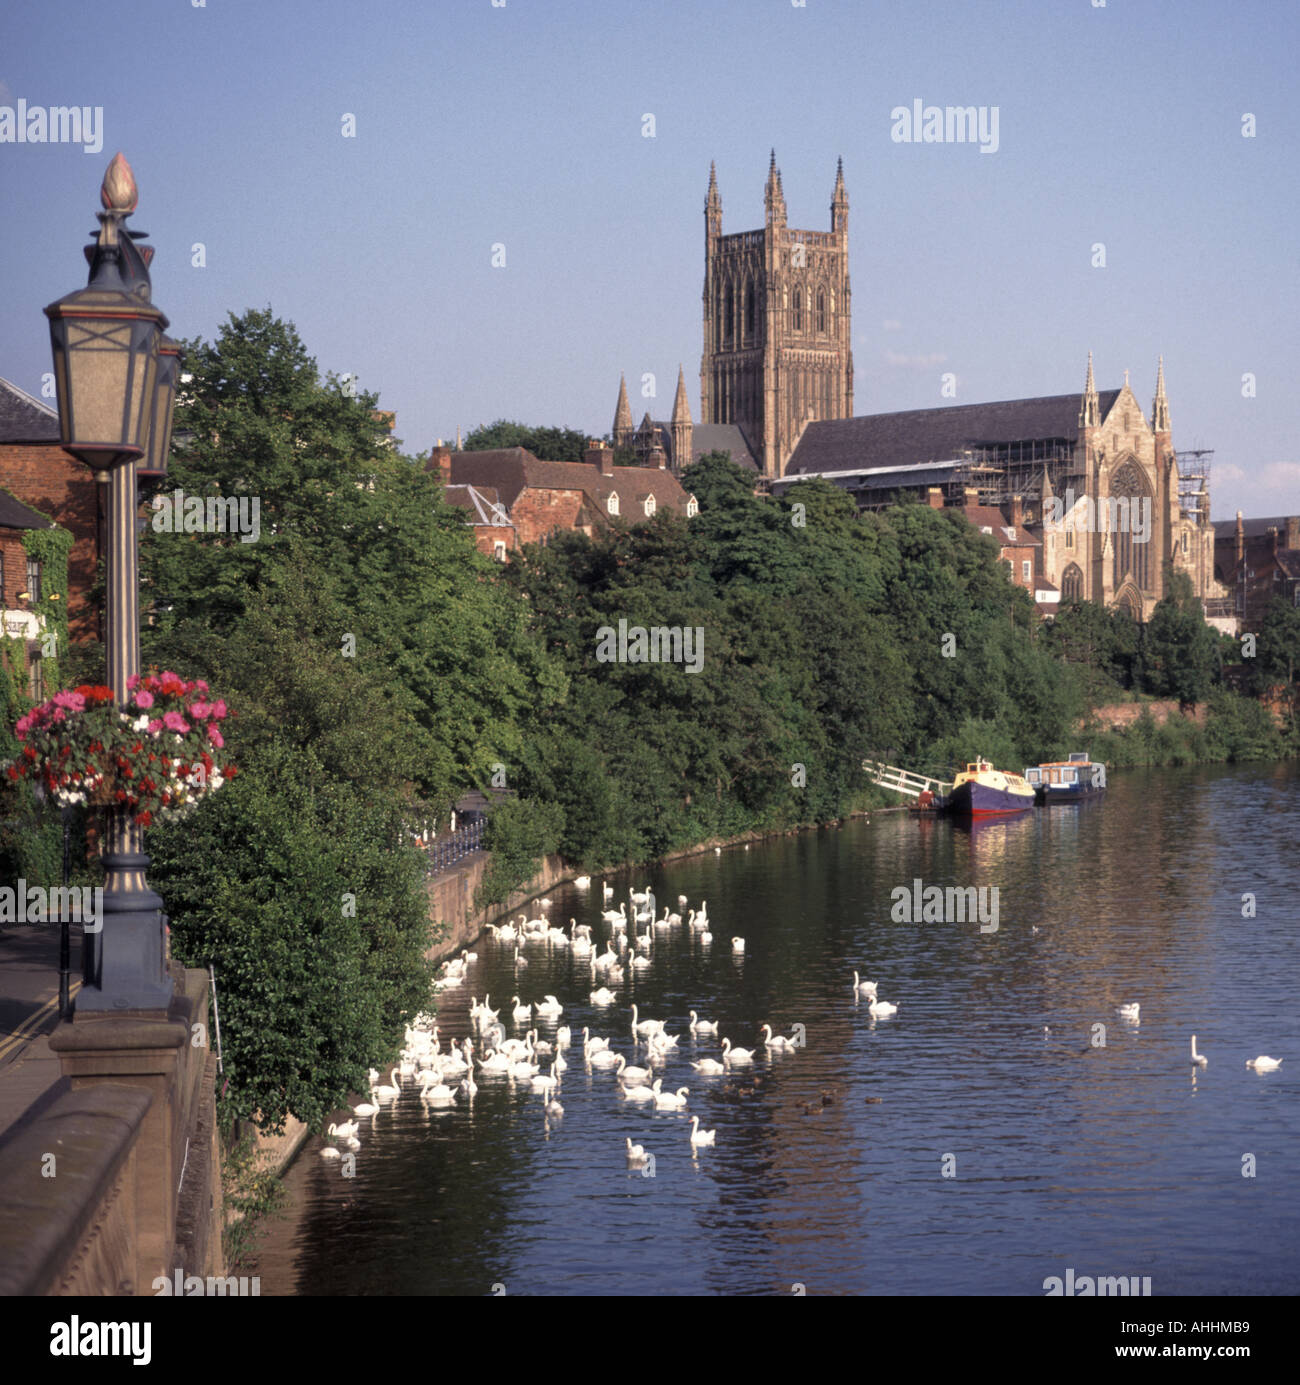 Large flock of swans on the River Severn historical Anglican Worcester Cathedral & Tower beyond seen on sunny blue sky day Worcestershire England UK Stock Photo